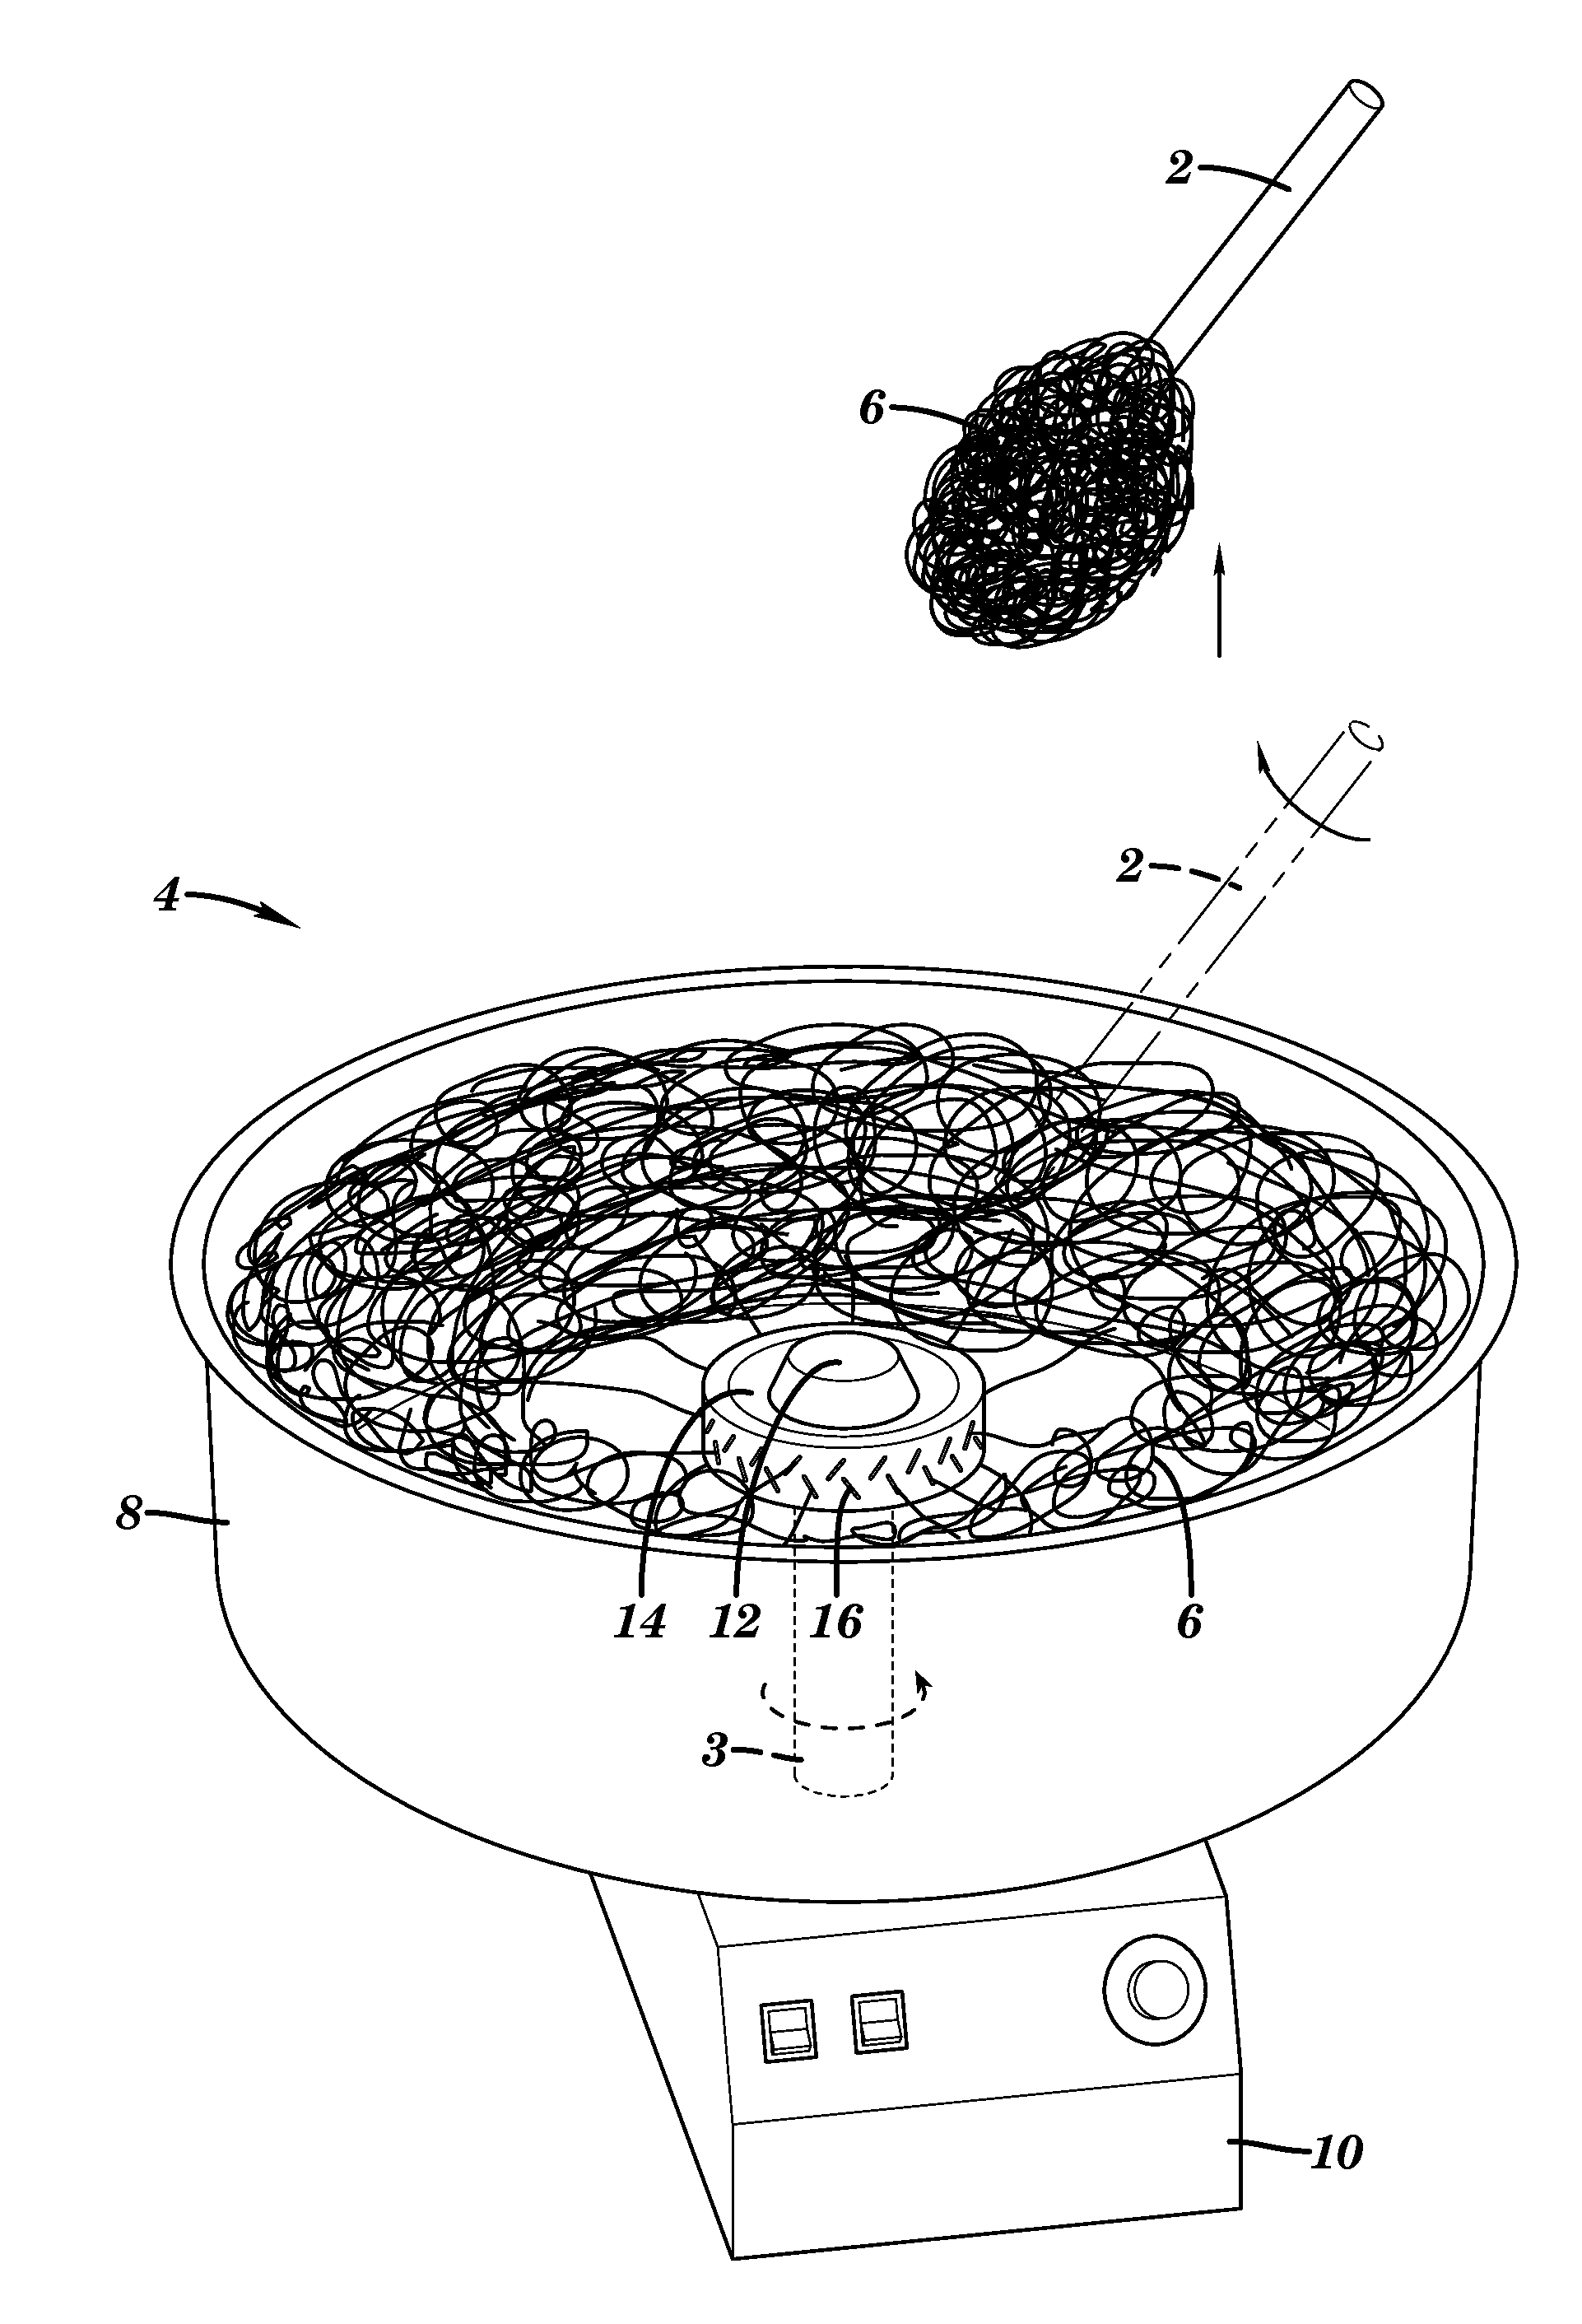 Fabrication of a vascular system using sacrificial structures